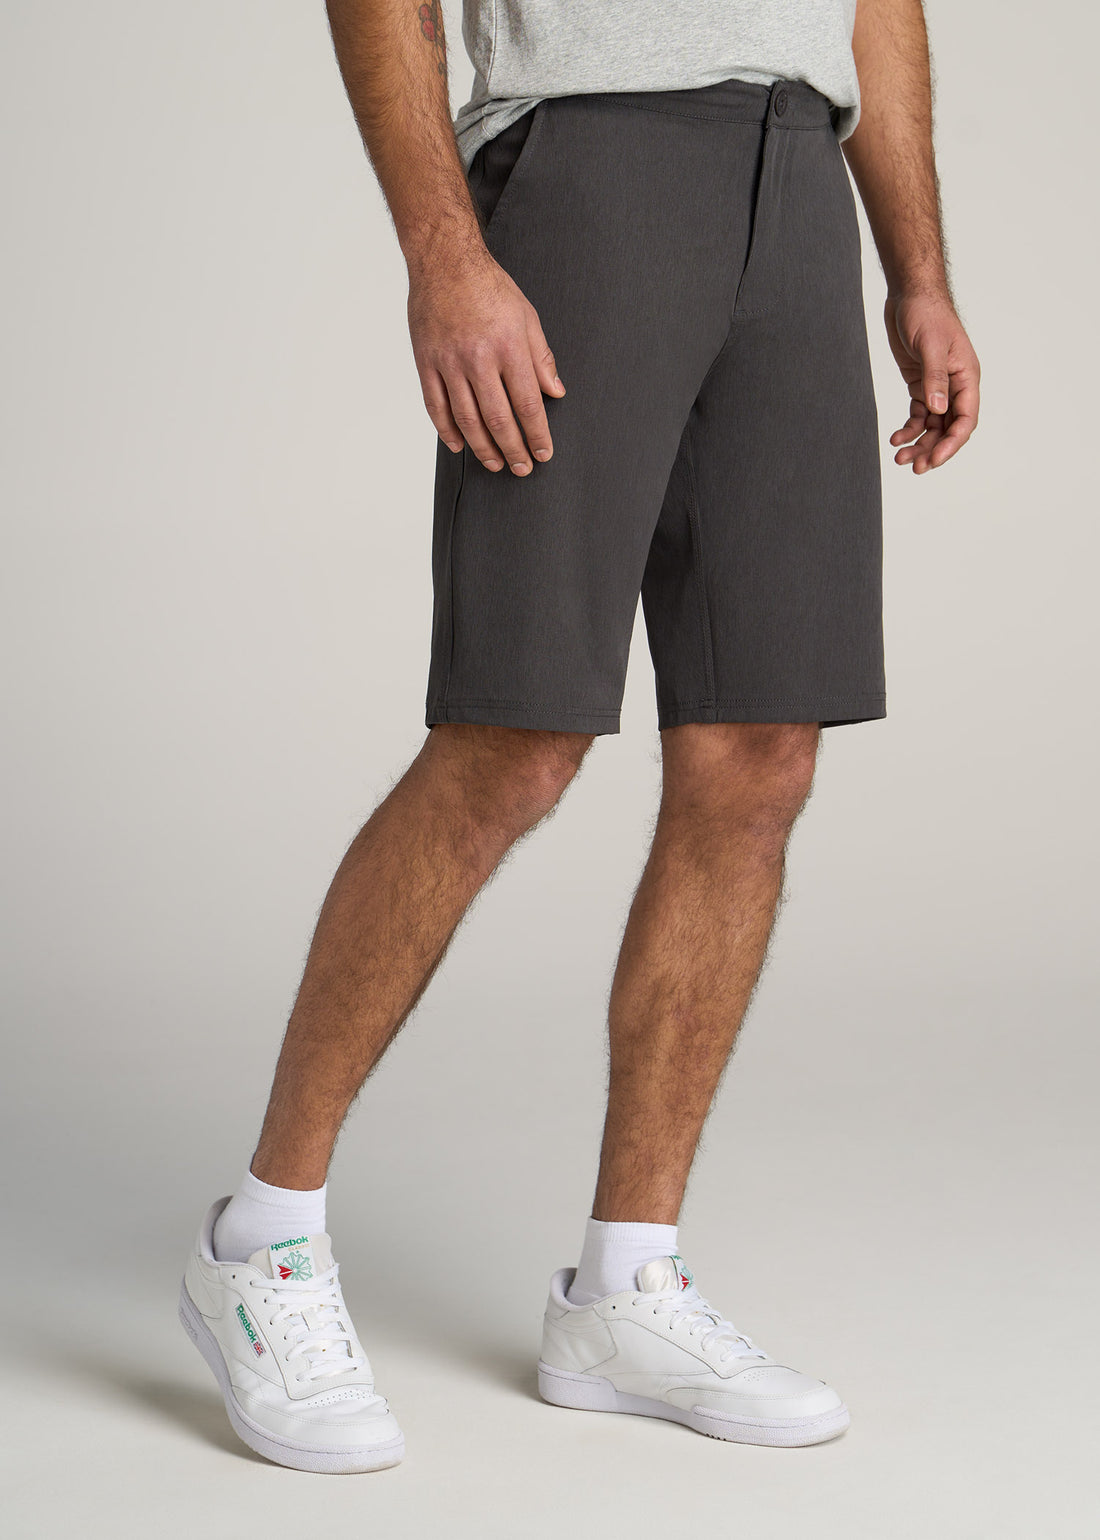 Tall man wearing oceanside shorts in a slate grey color.